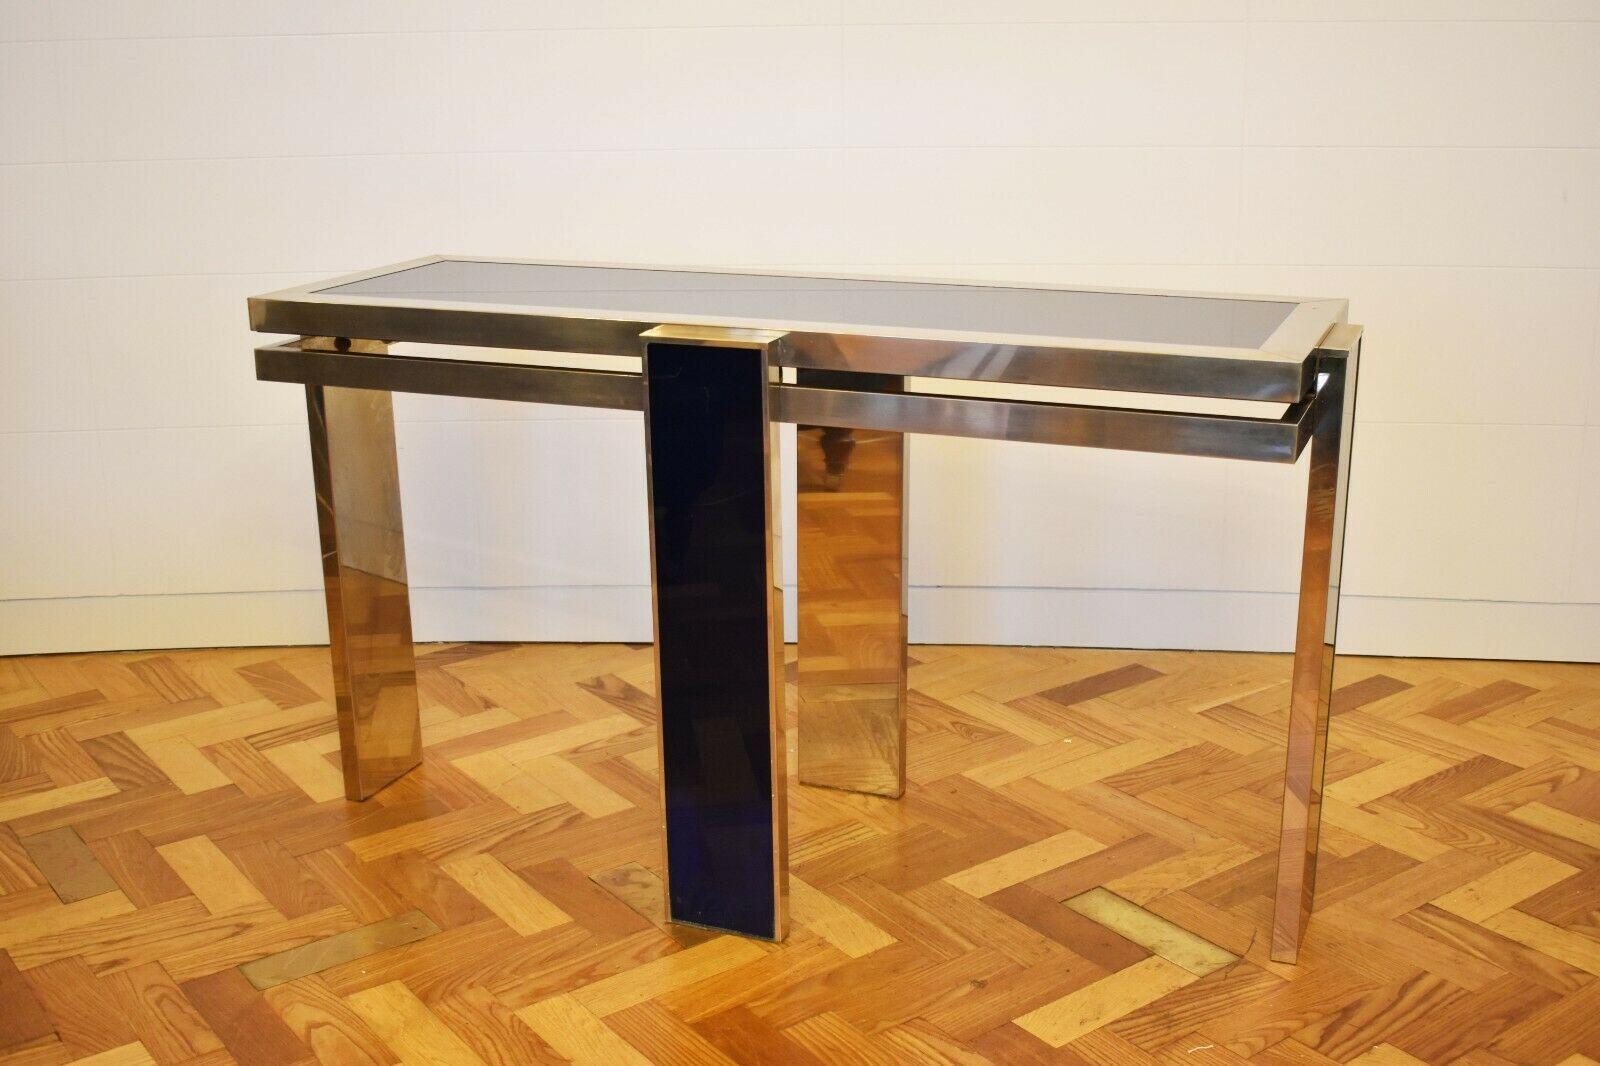 Rare and unique, this console table features a glass top that is set within a chrome base, that boasts a navy Perspex detailing. 

This spectacular Mid-Century Modern design piece was made by the renowned designer, Giacomo Sinopoli for Liwans, the